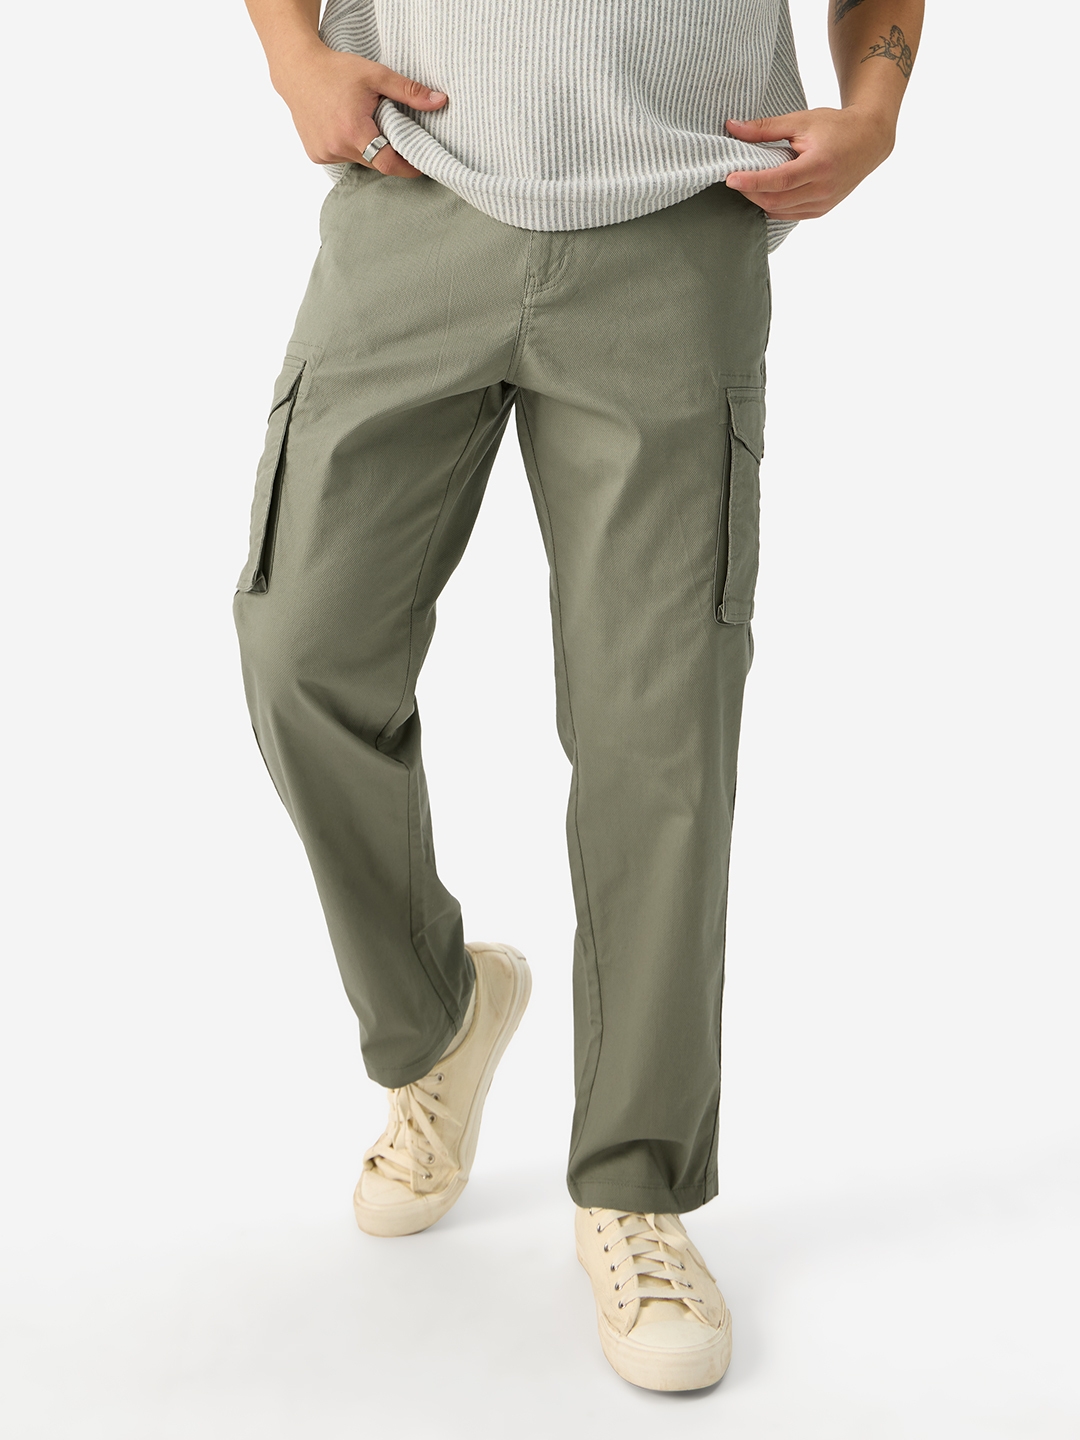 The Souled Store | Men's Solids Light Olive Cargo Pants